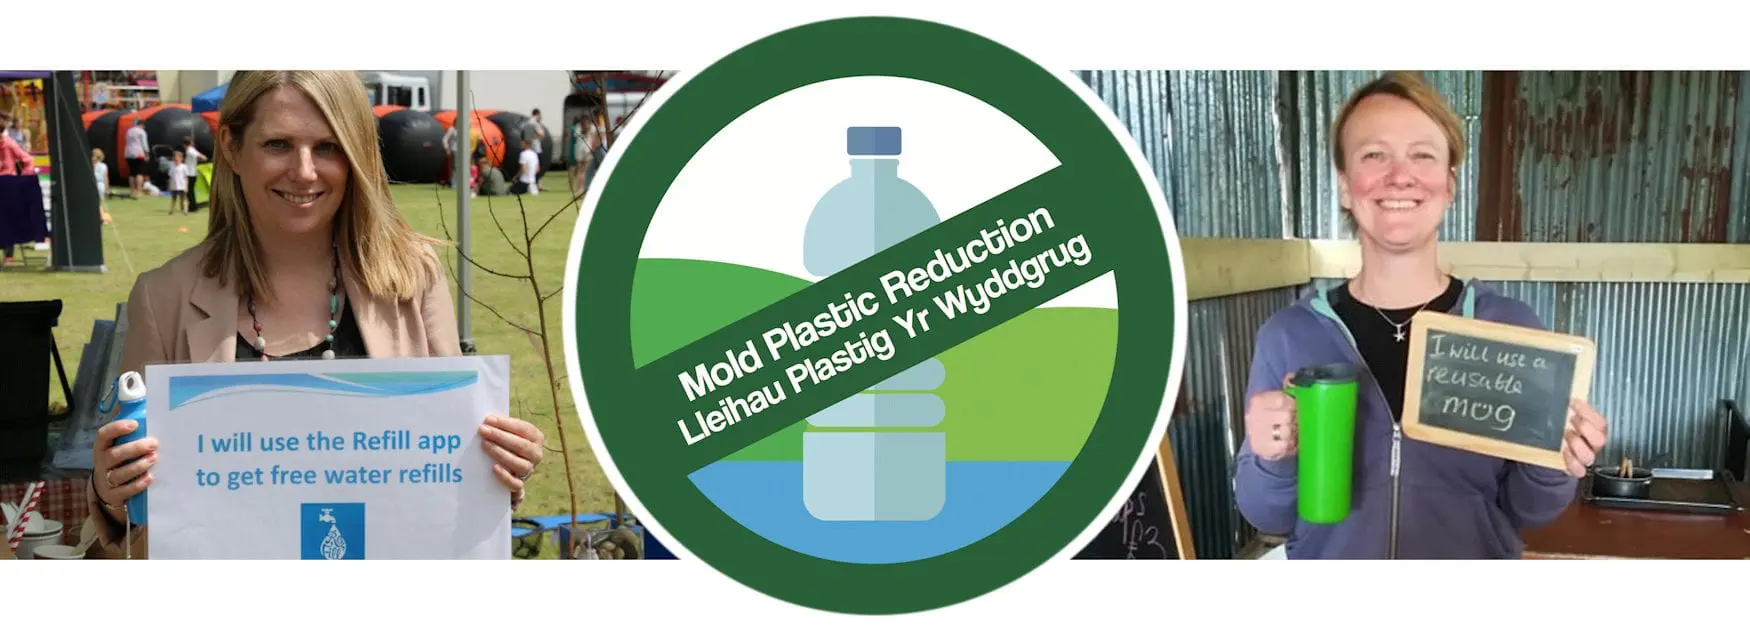 Header image for On the Go page showing pledges to use fewer plastic bottles